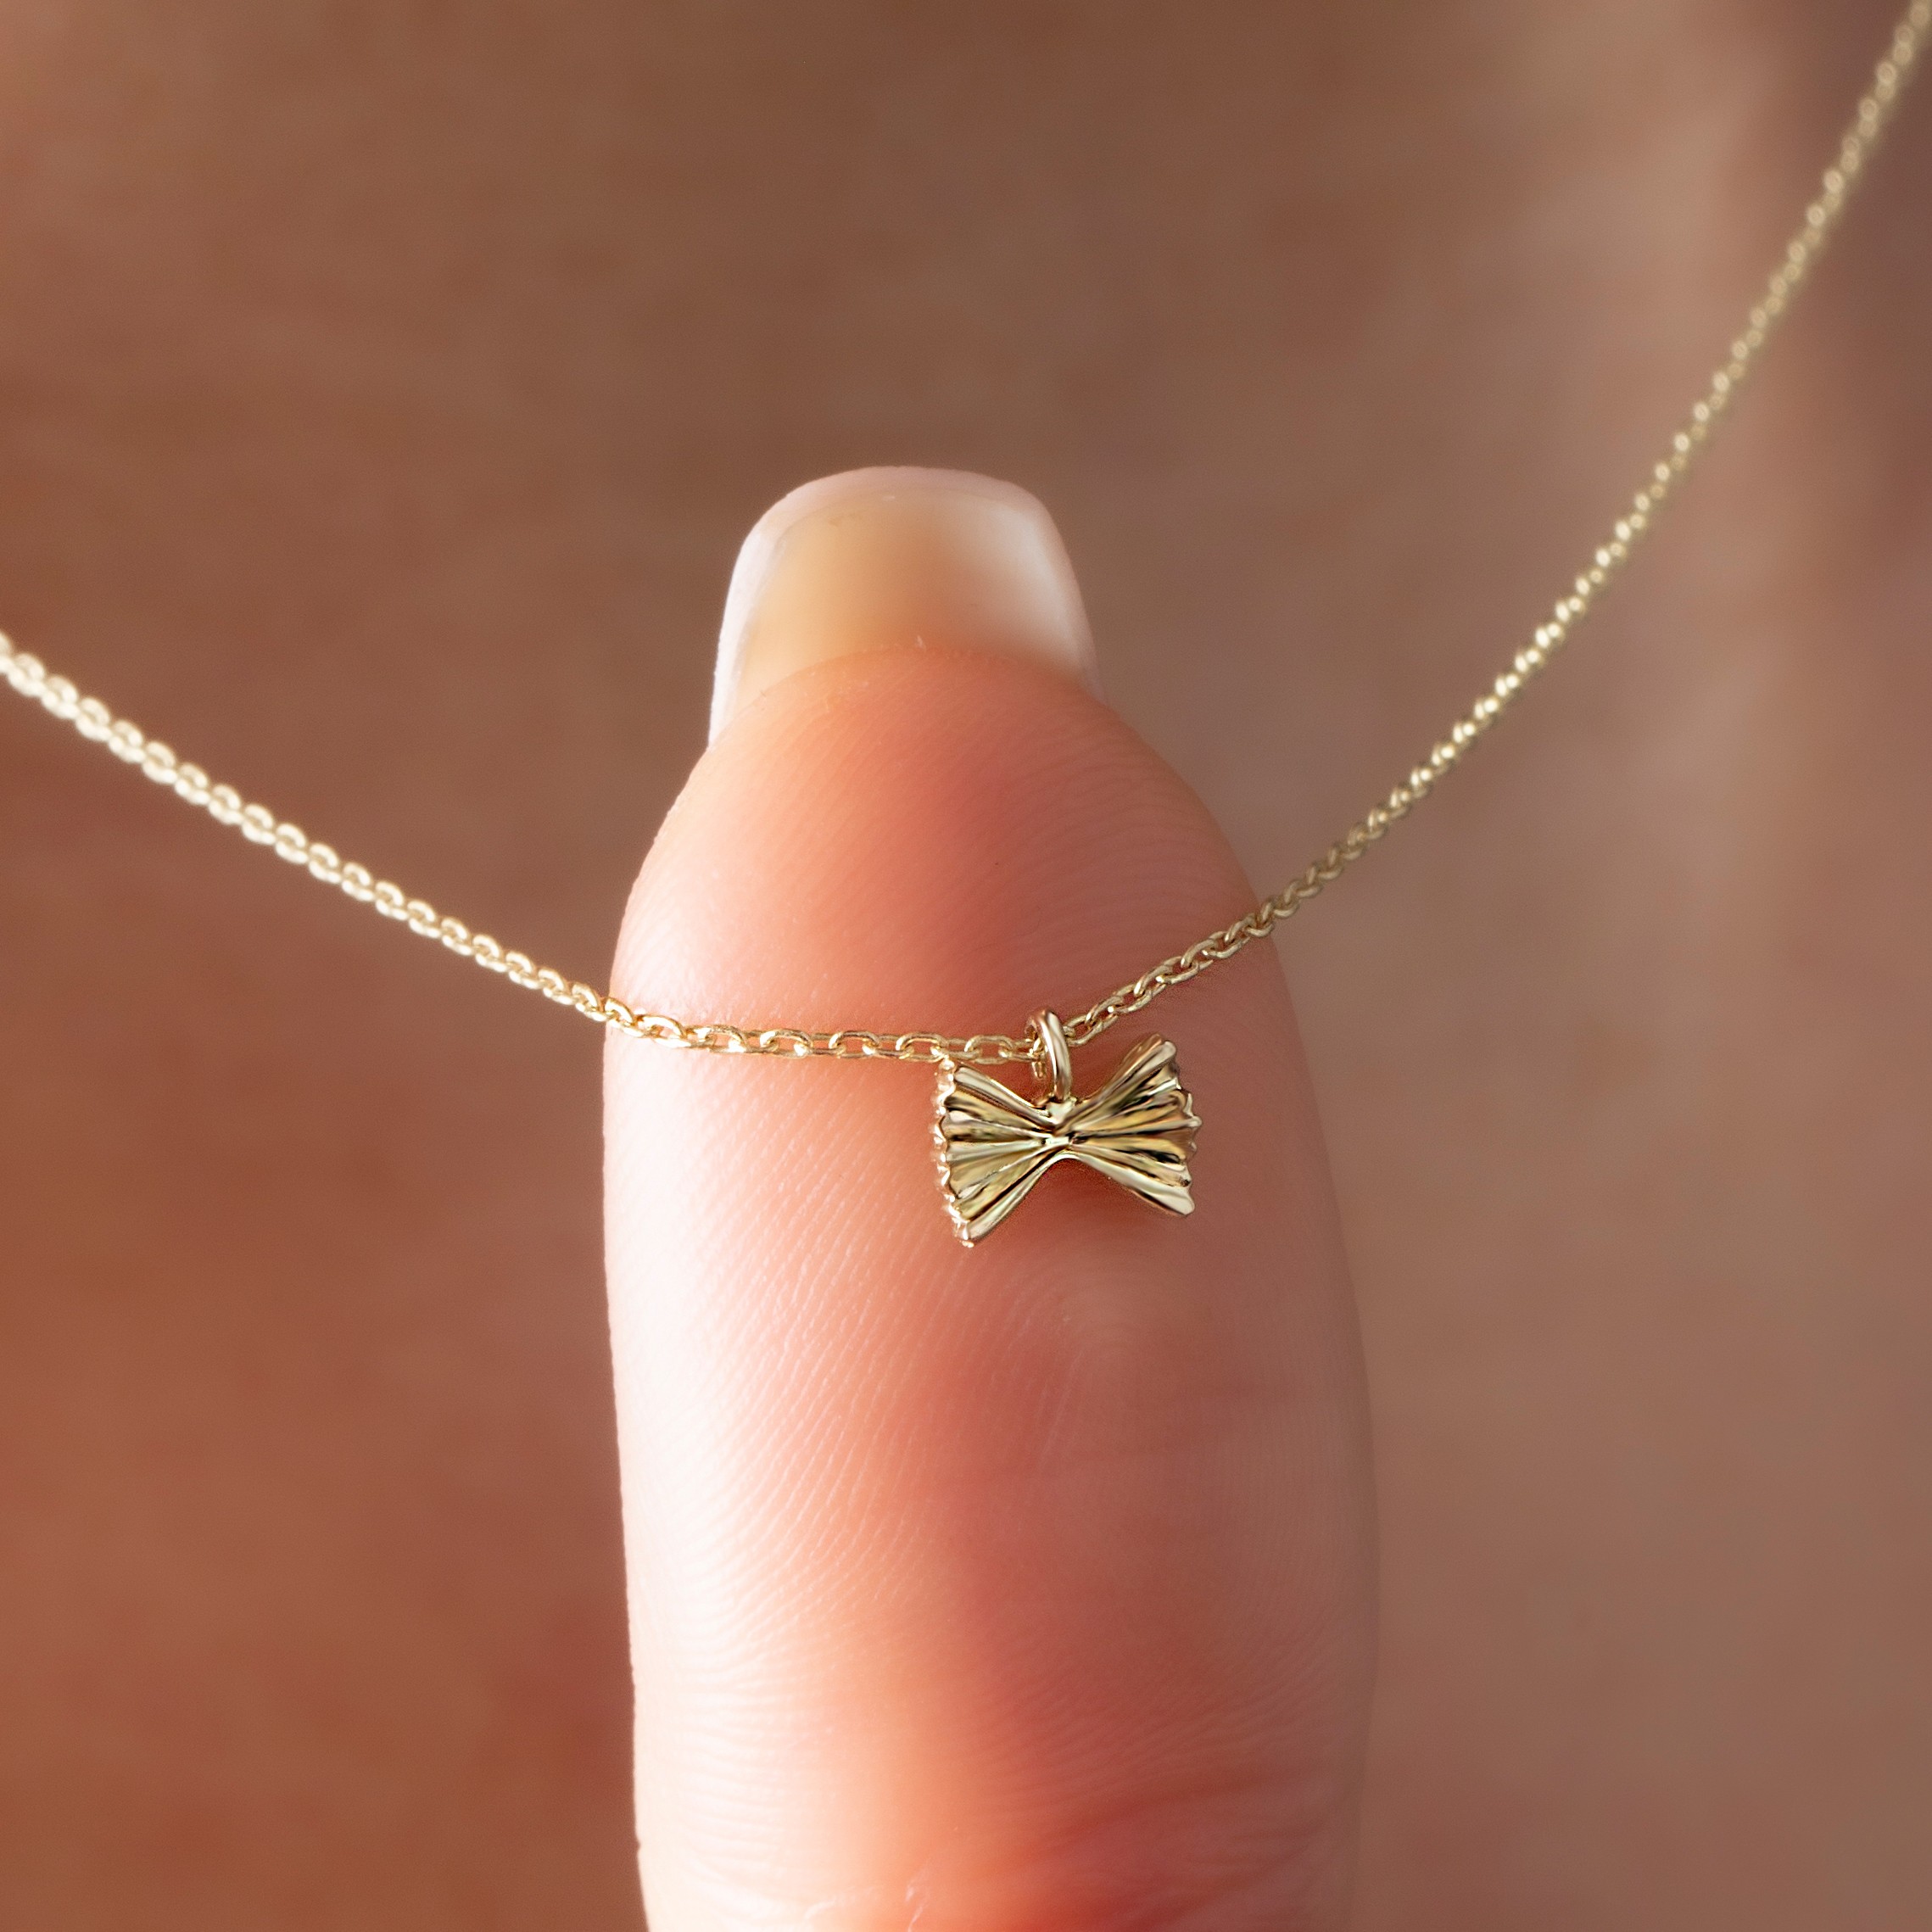 14 Carat Gold Bow Tie Necklace